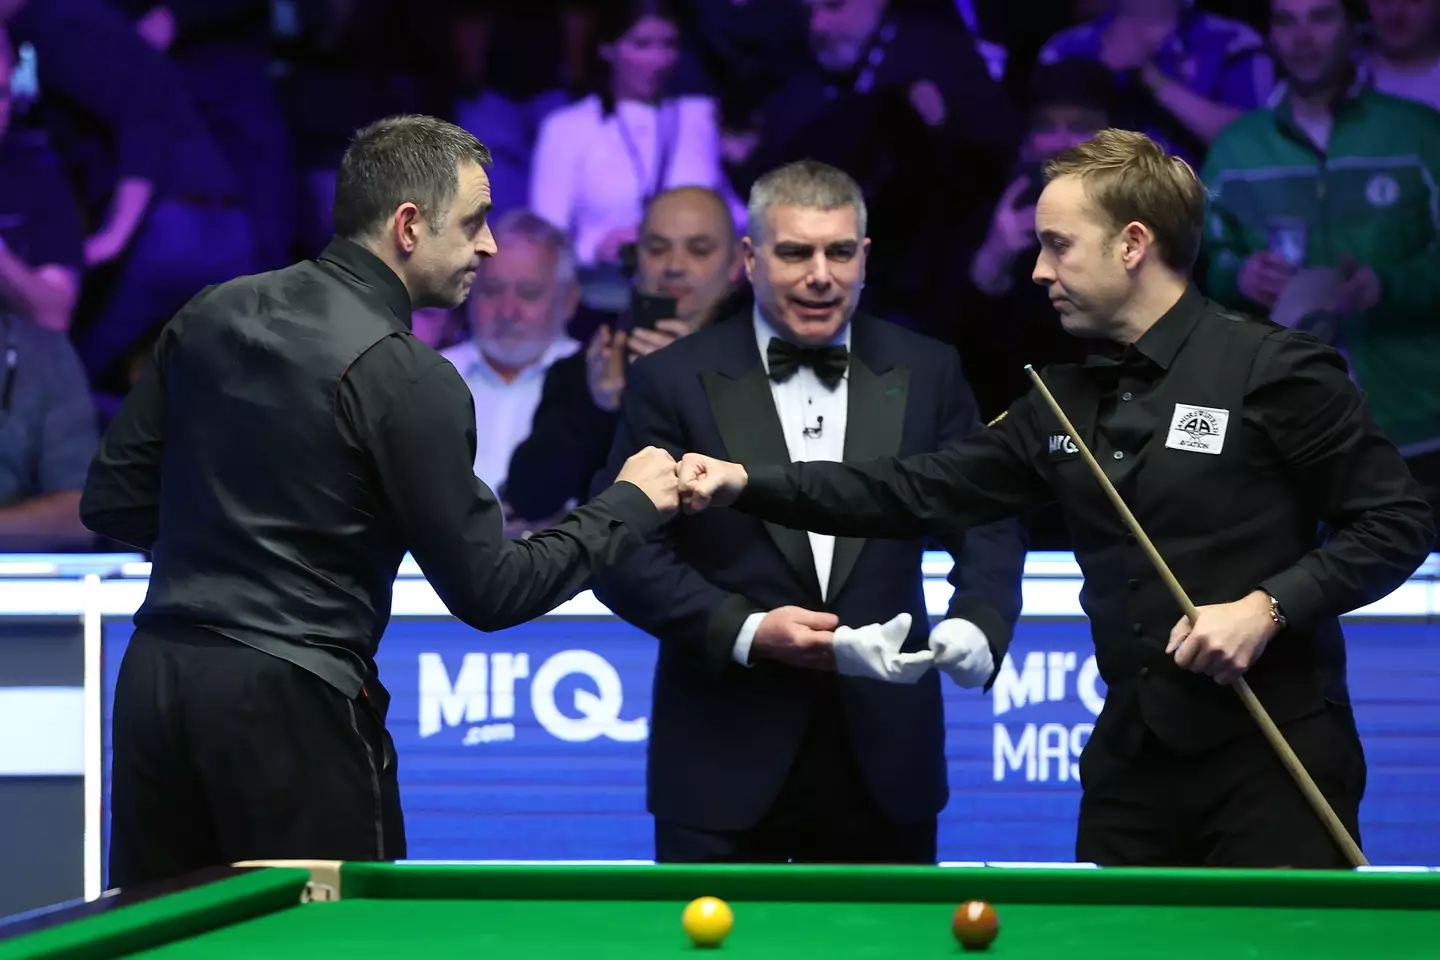 Ronnie O'Sullivan and Ali Carter shakes hands after the Masters final. Image: Getty